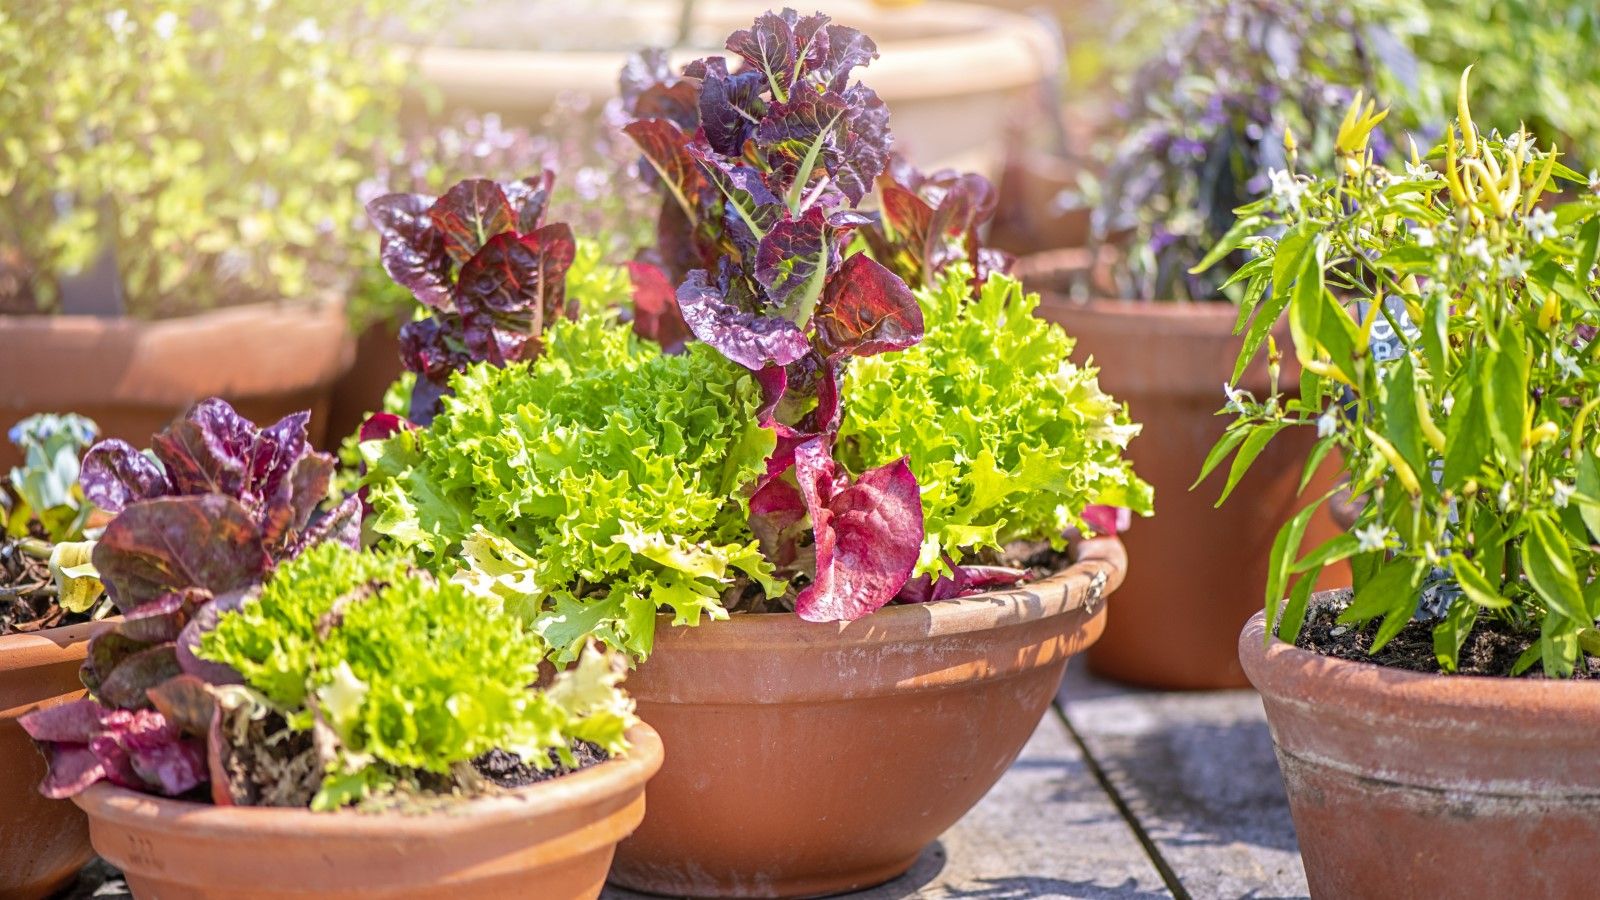 Best vegetables to grow in pots: 10 crops for small spaces